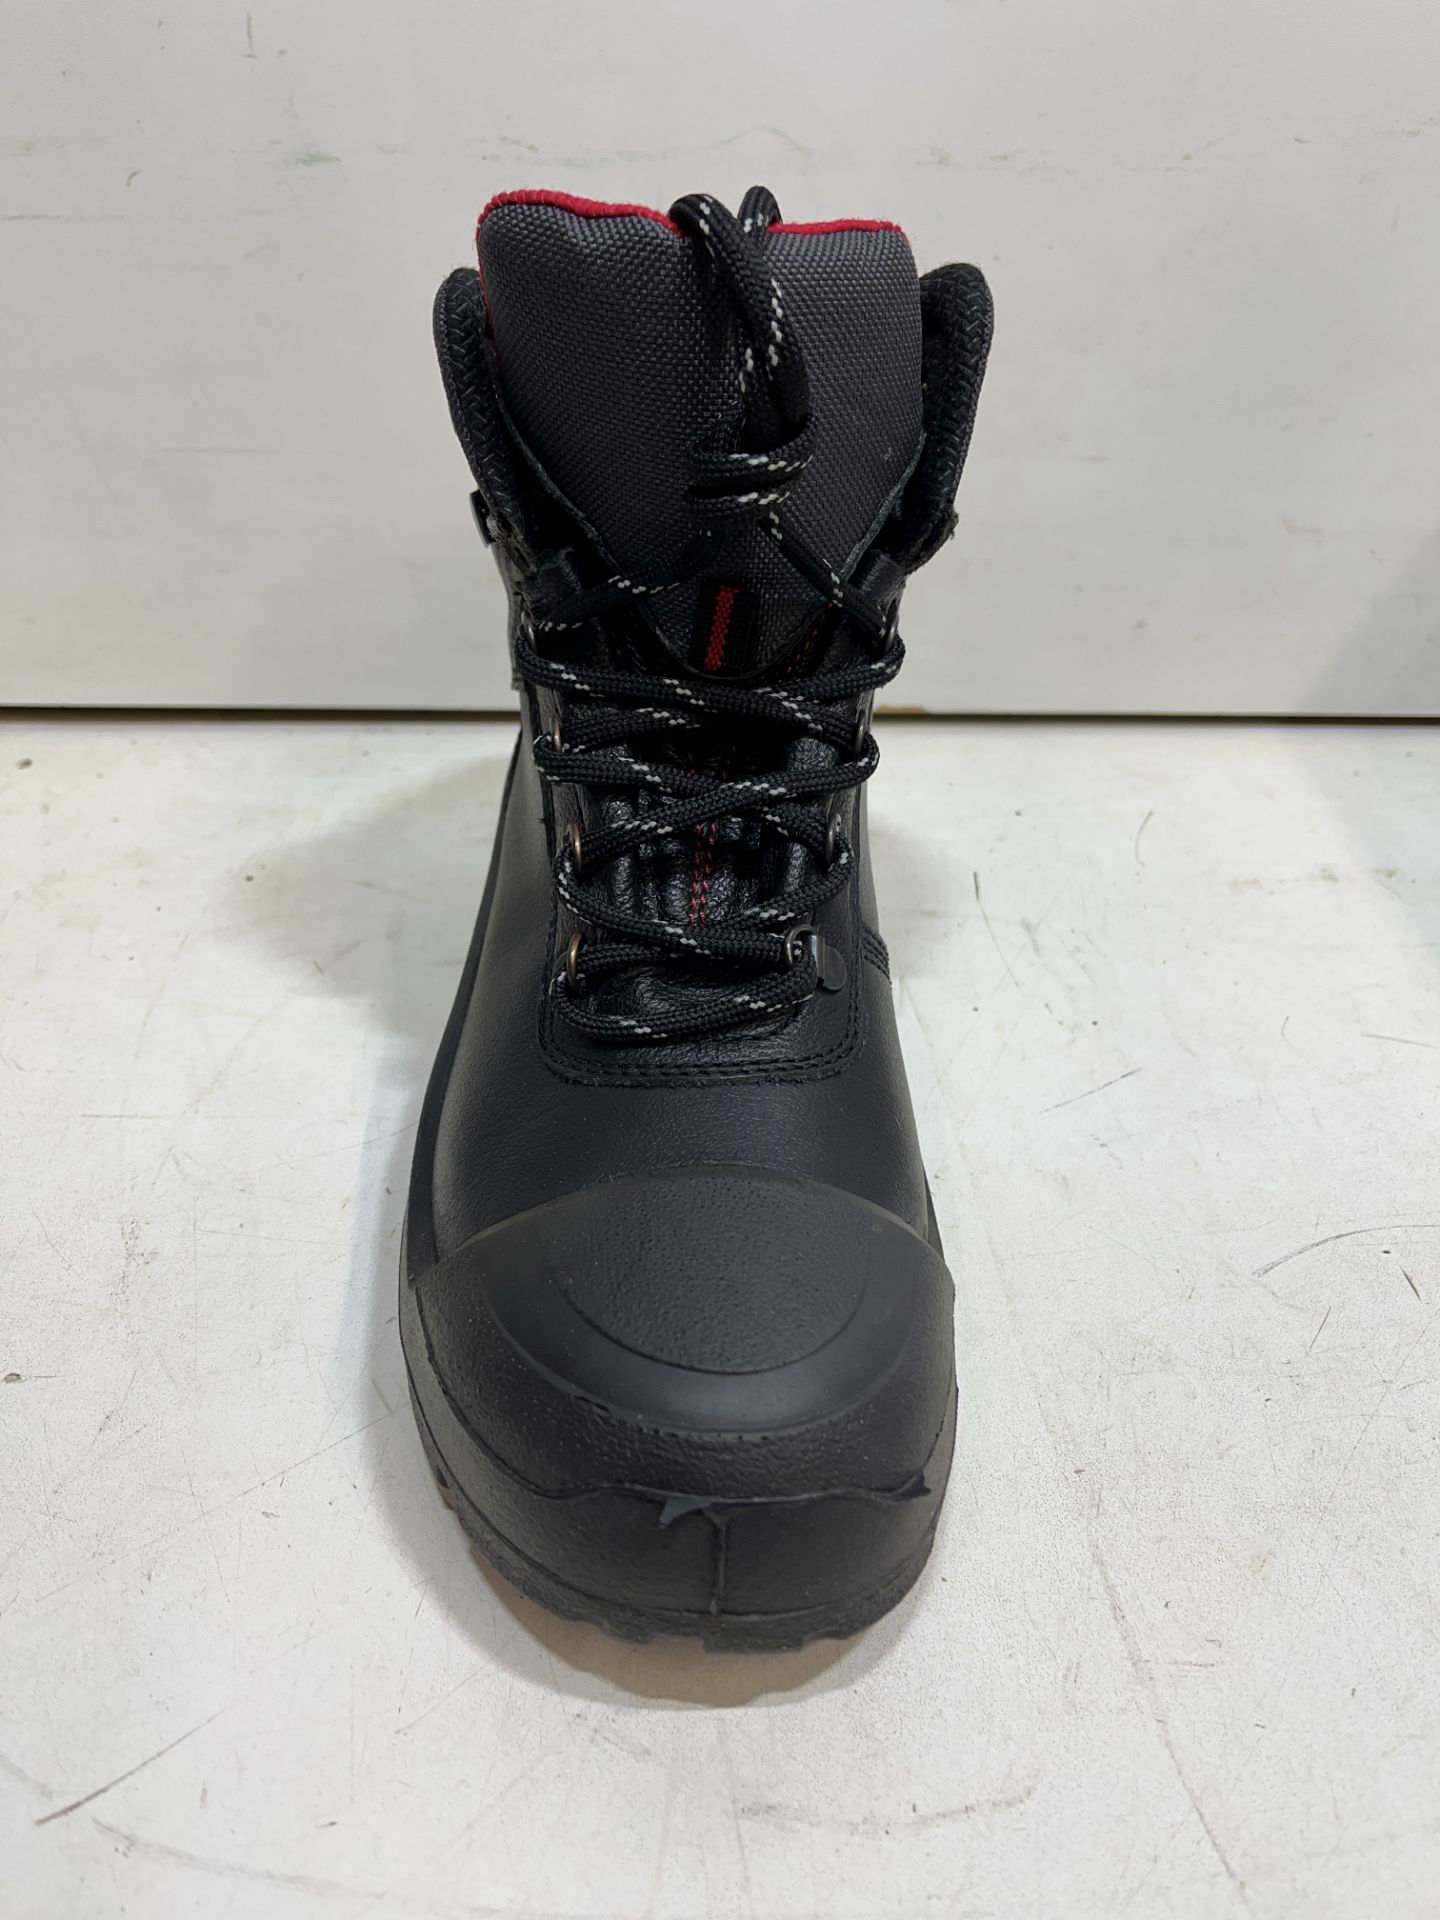 Uvex Safety Boots | UK 6 - Image 3 of 4